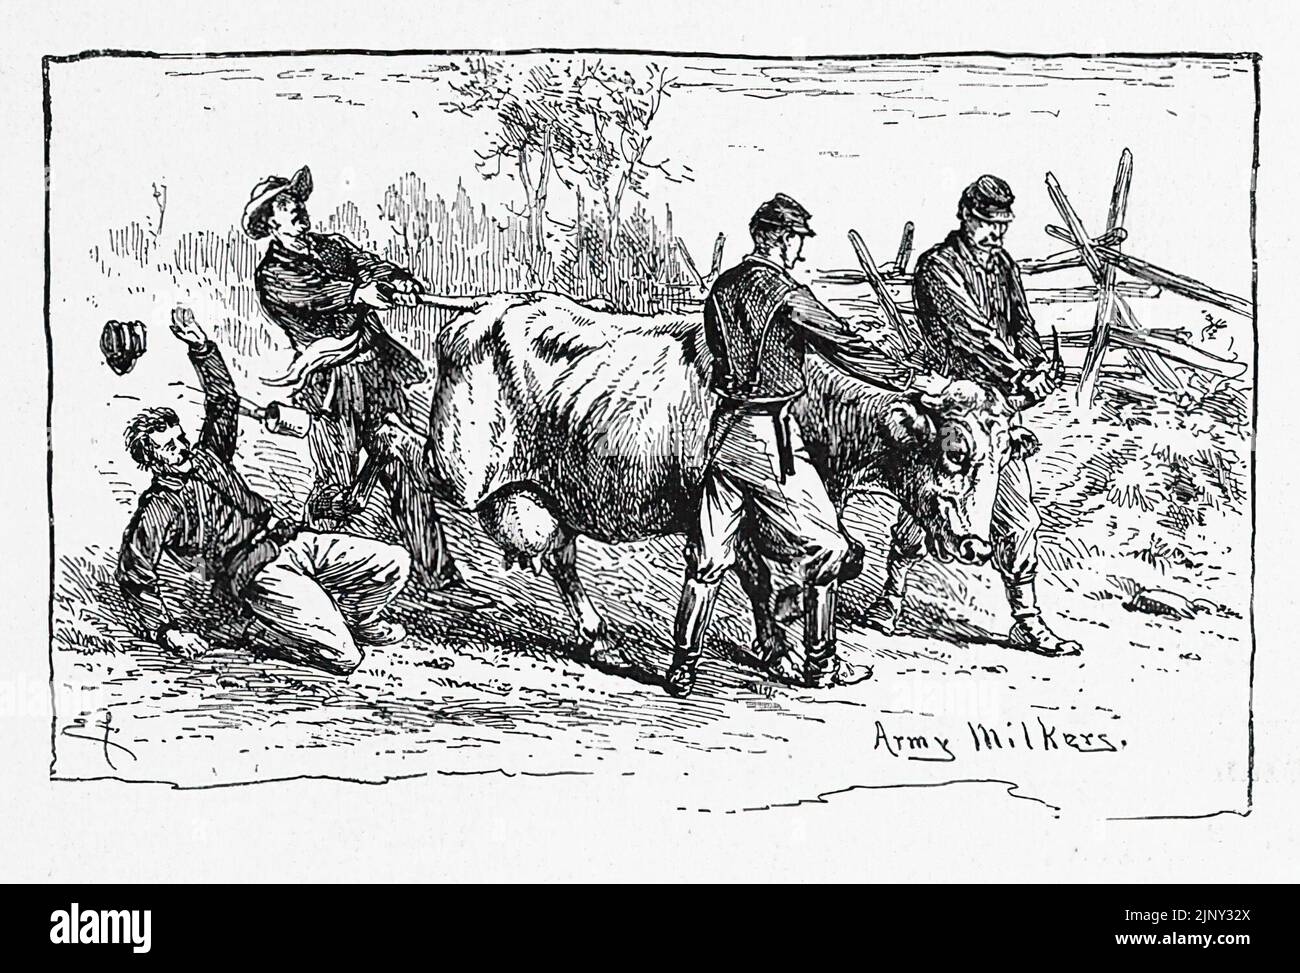 Army Milkers. Union Army soldiers milking a cow. 19th century American Civil War illustration by Edwin Forbes Stock Photo